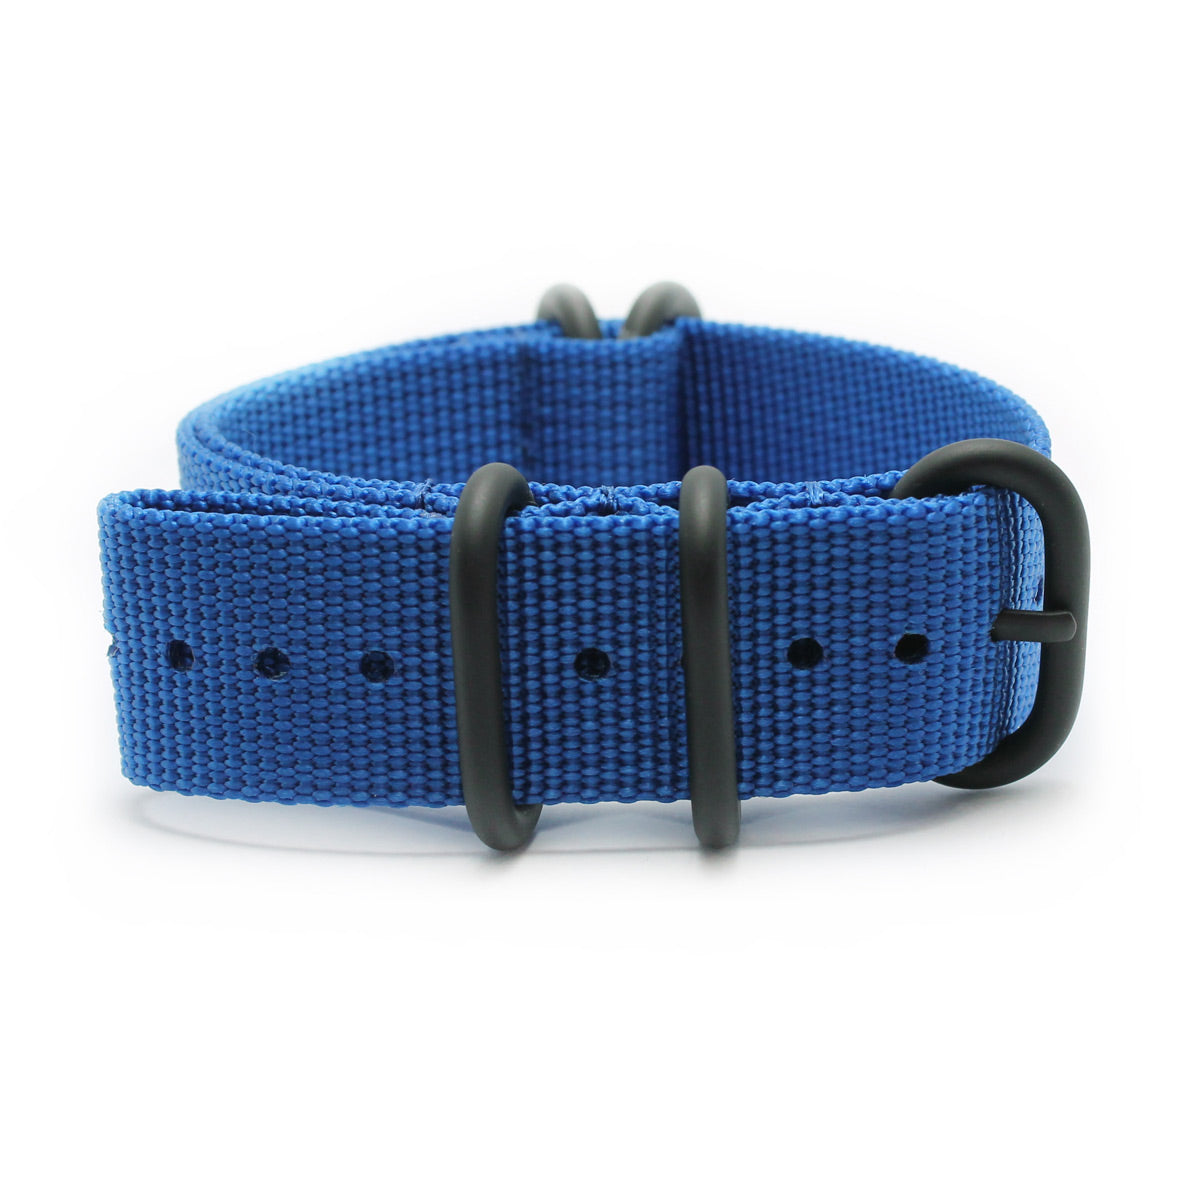 NATO STYLE 5-RING ZULU WATCH STRAP - BLUE WITH BLACK BUCKLES